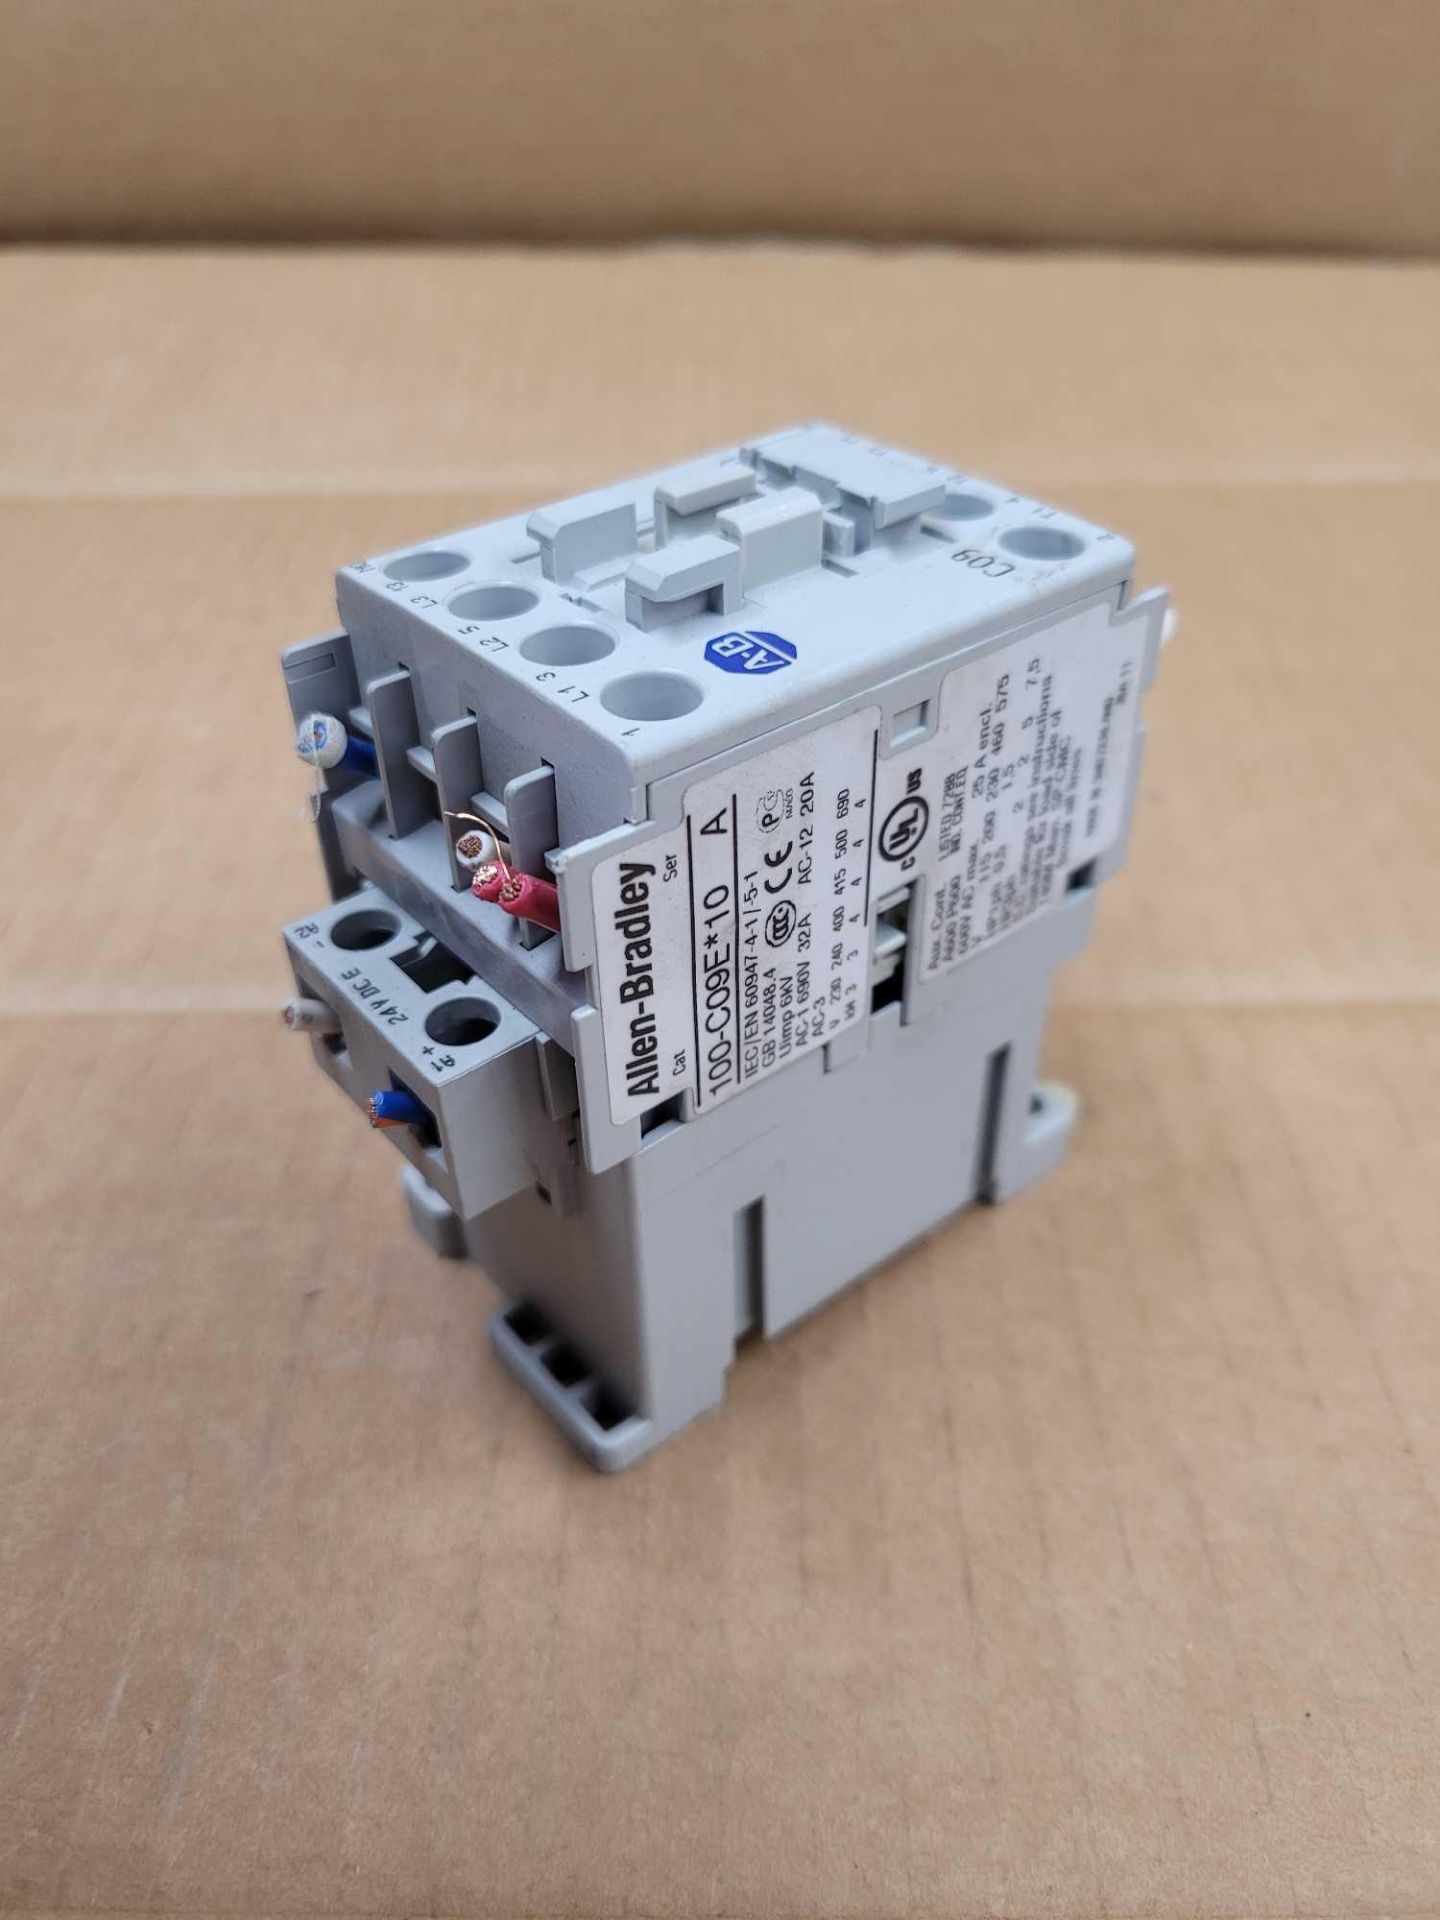 LOT OF 5 ALLEN BRADLEY 100-C09E*10 / Series A Contactor  /  Lot Weight: 4.2 lbs - Image 3 of 8